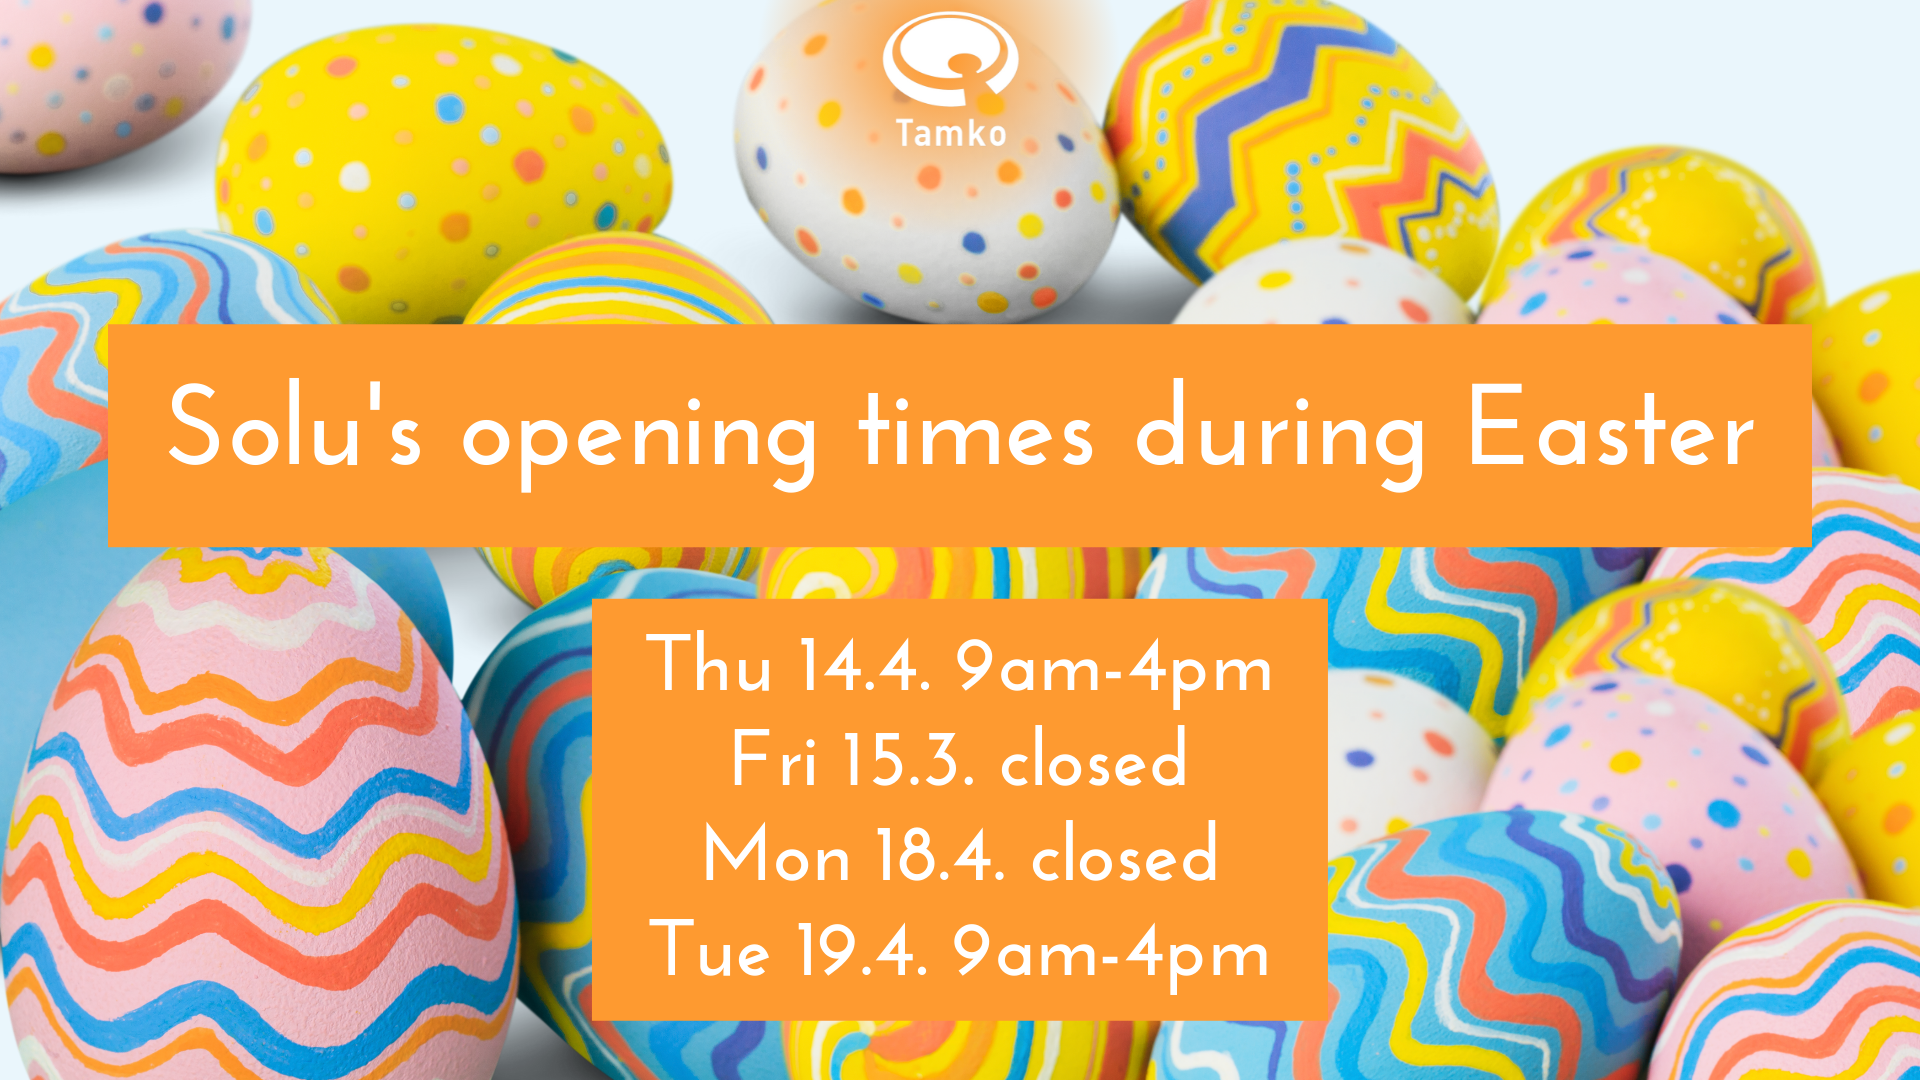 Solu’s opening times during Easter